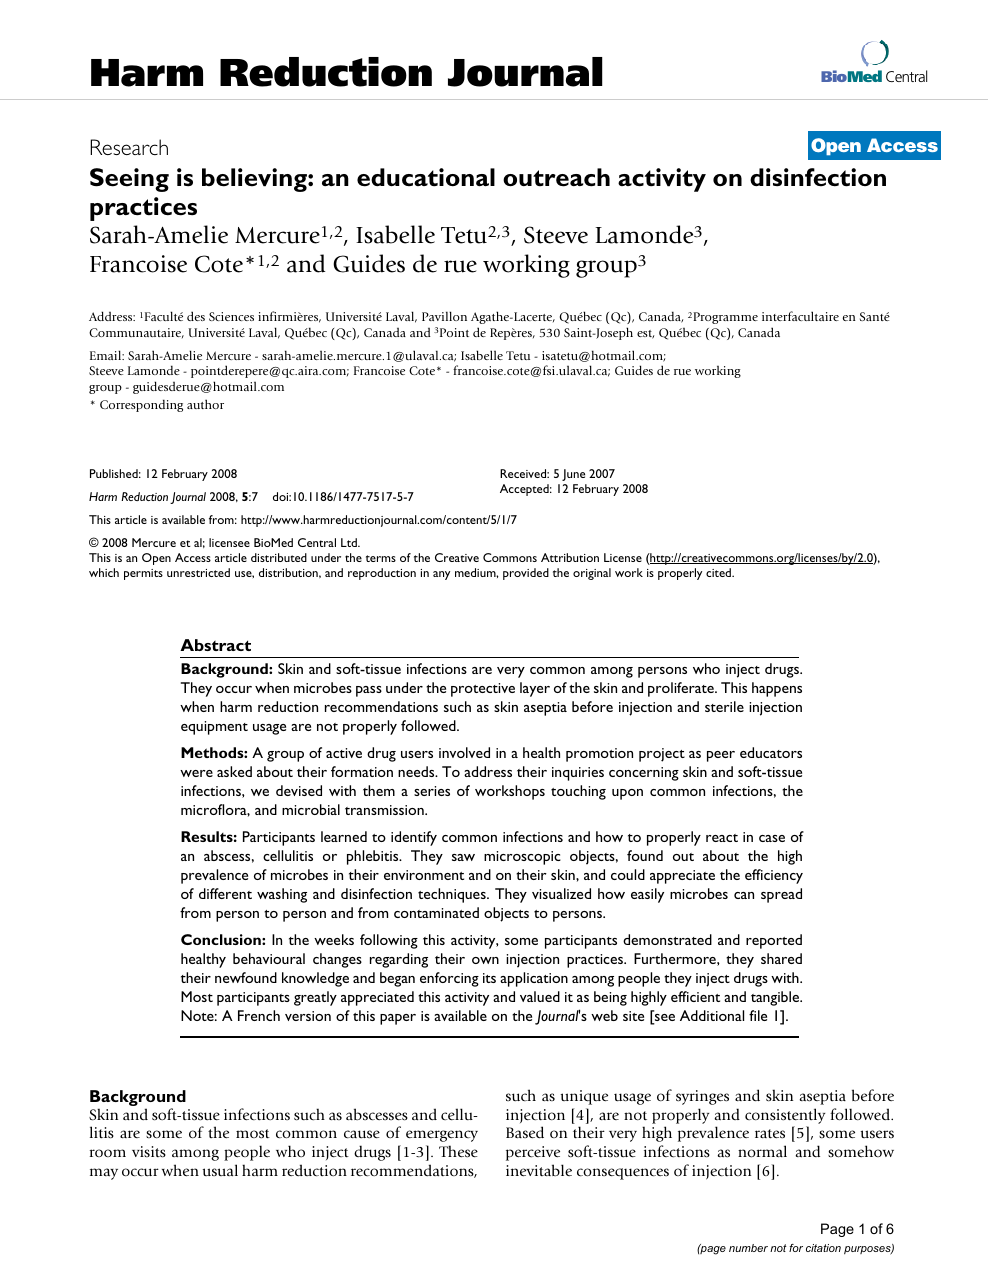 Seeing Is Believing An Educational Outreach Activity On Disinfection Practices Topic Of Research Paper In Clinical Medicine Download Scholarly Article Pdf And Read For Free On Cyberleninka Open Science Hub